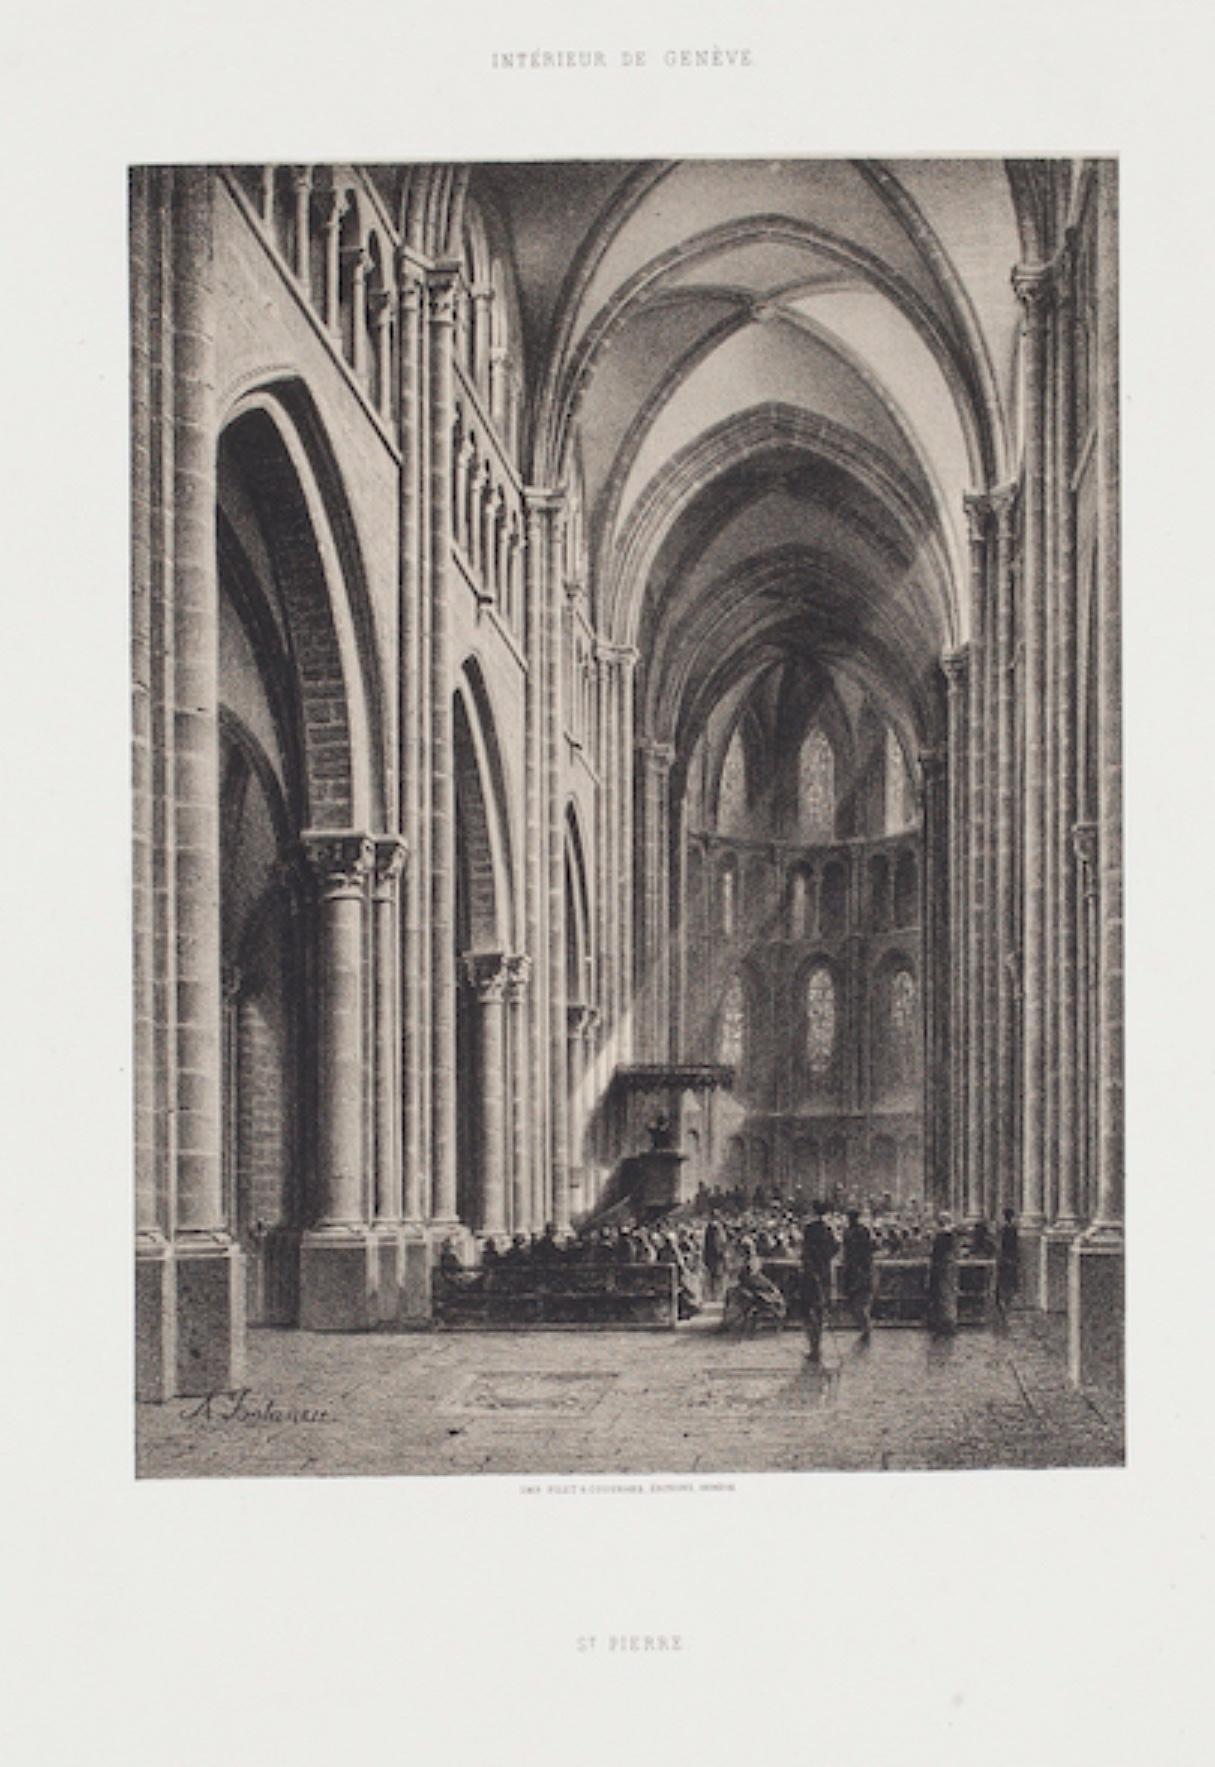 The Interior of Geneve is an original Lithograph by  Antonio Fontanesi in the 19th Century.

The state of preservation of the artwork is excellent. Image Dimensions:  21.5 x 16.5cm

The signature is engraved on the plate the lower left. At the top